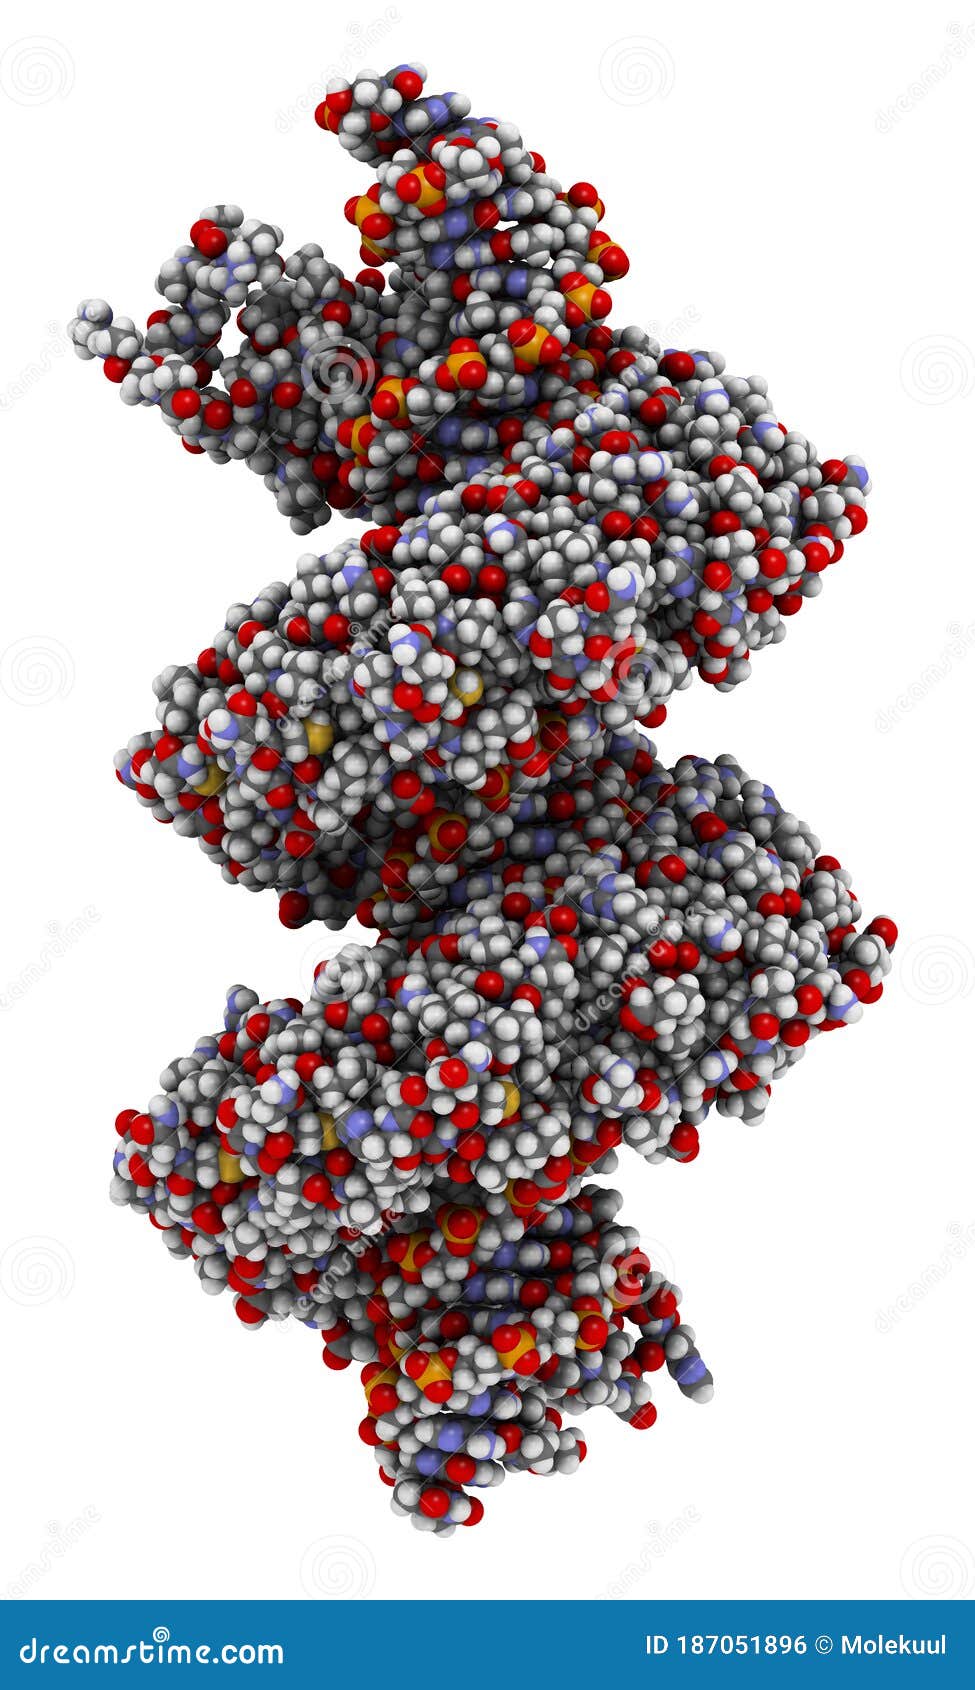 tal transcription activator like effector protein or tale. dna binding protein. in talen technology, these are combined with.